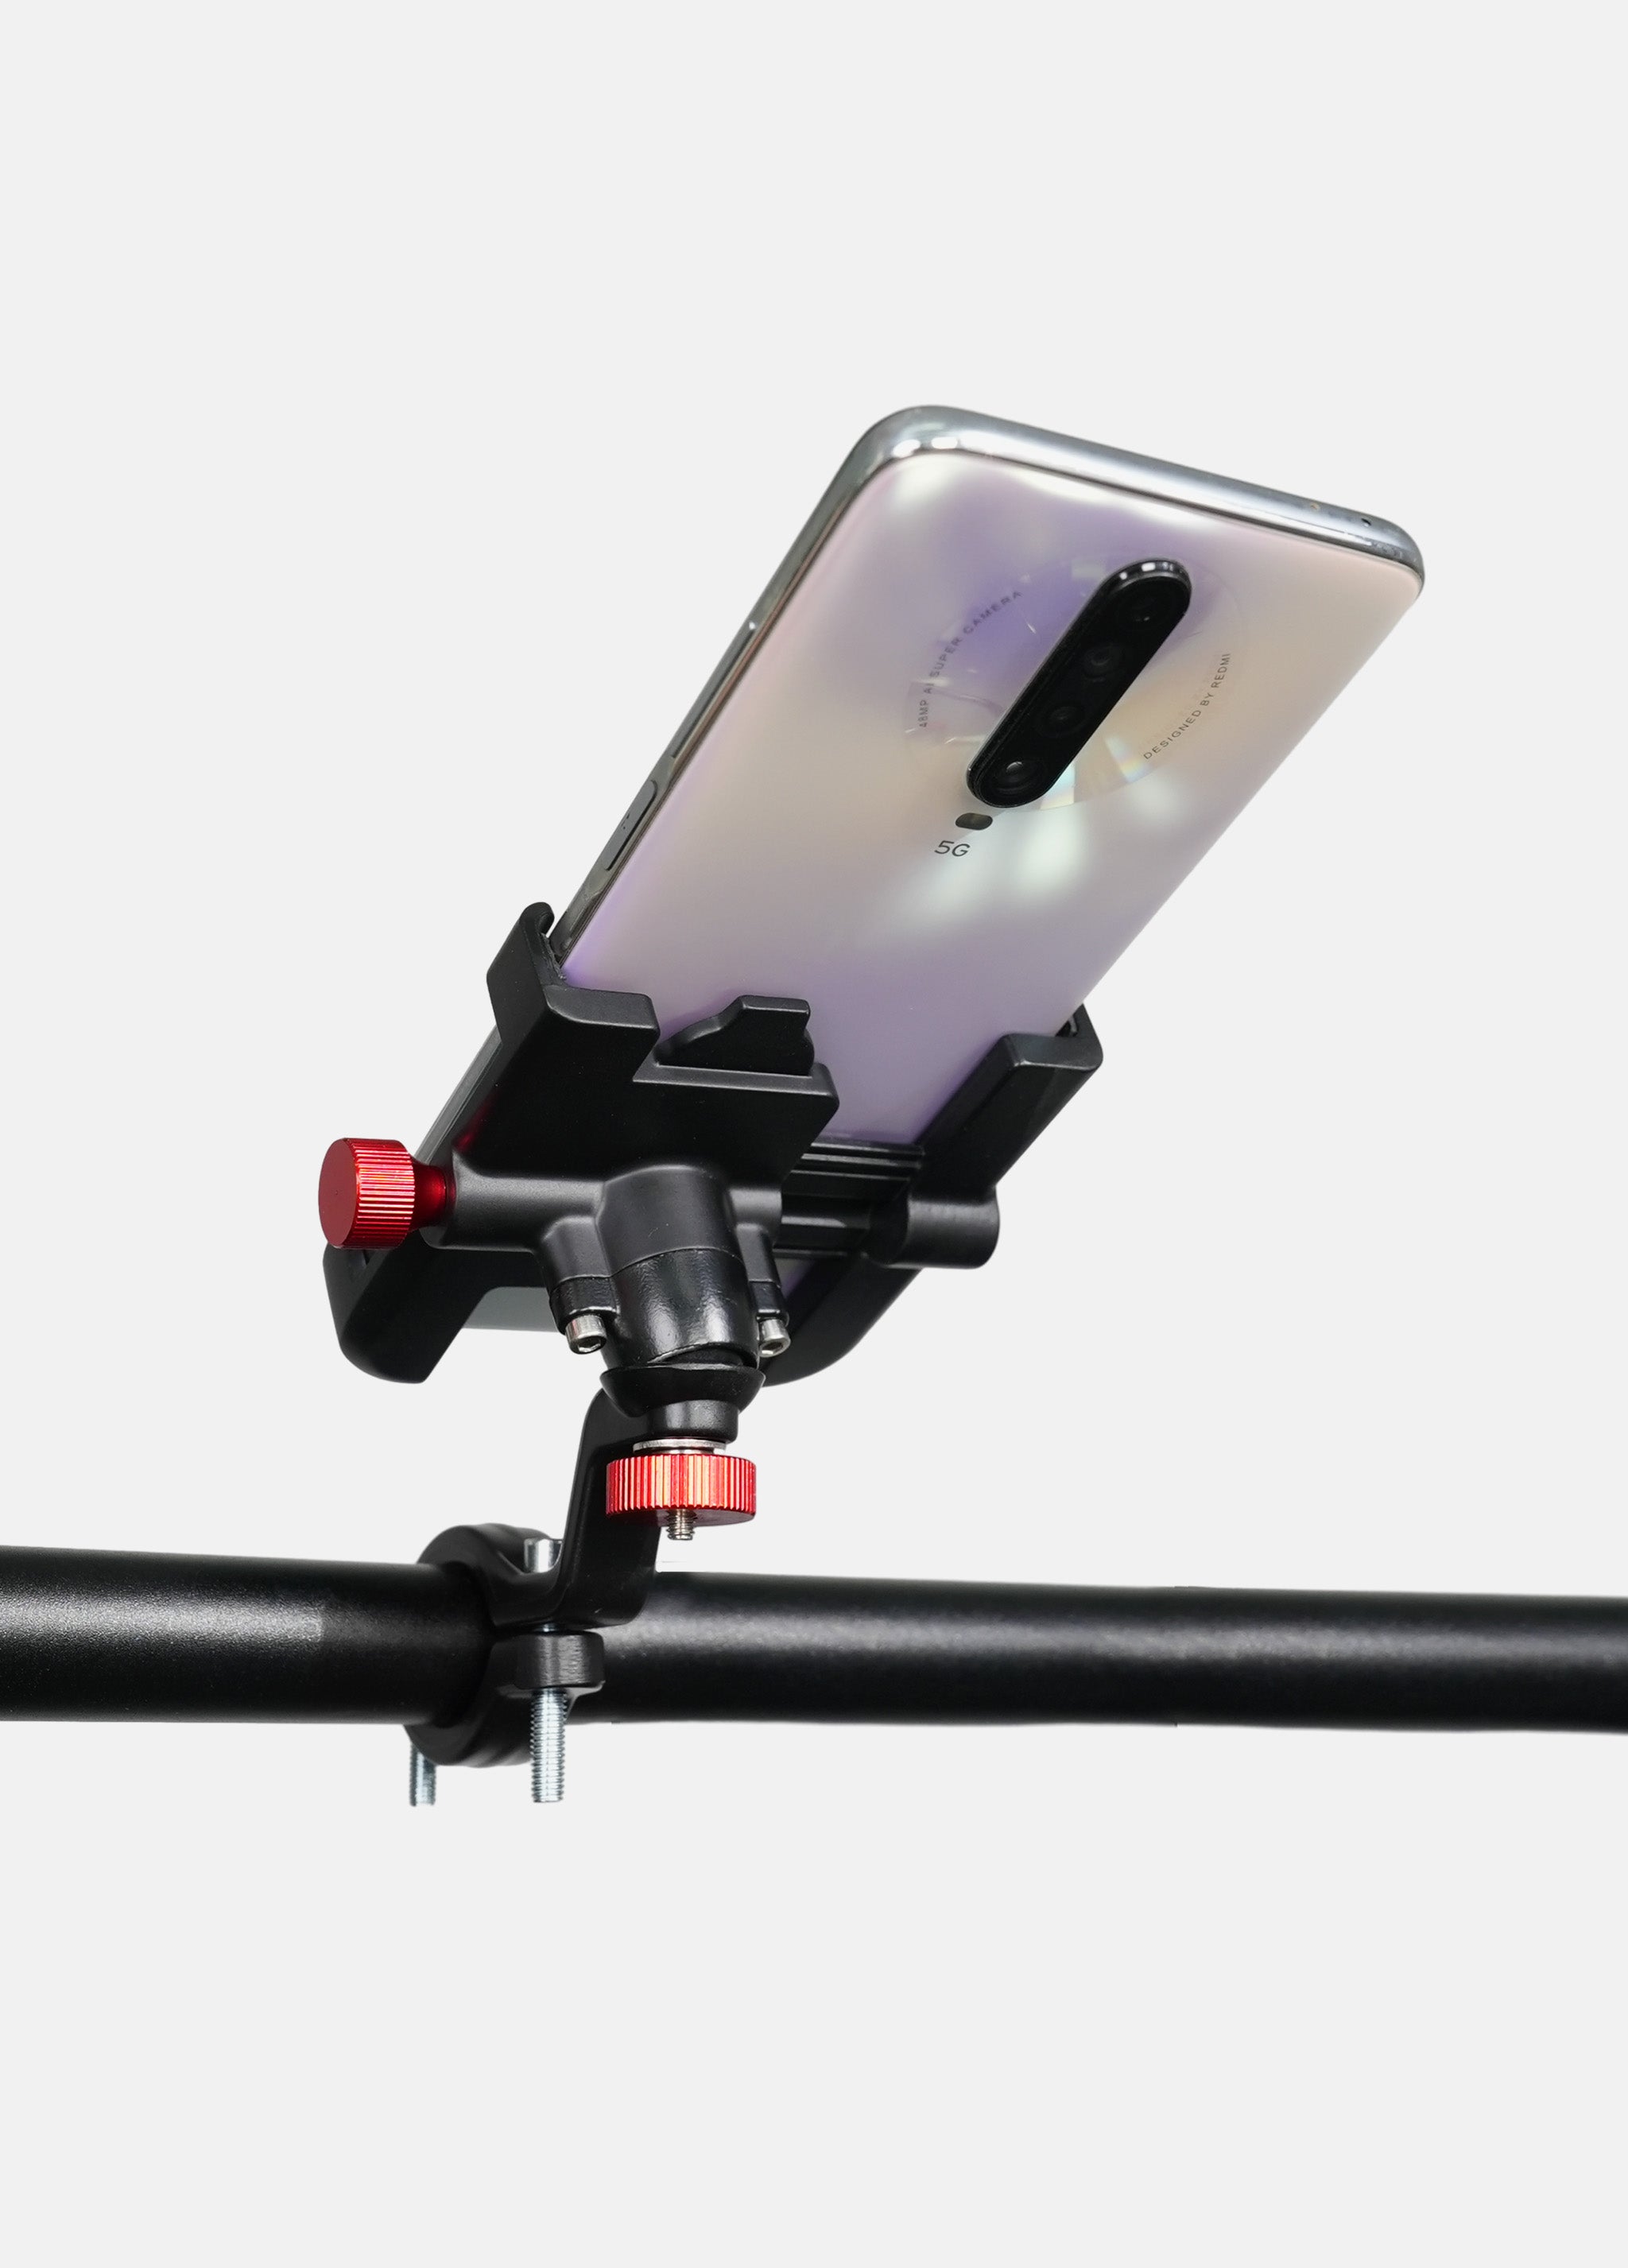 360° rotatable mobile phone holder for bicycles